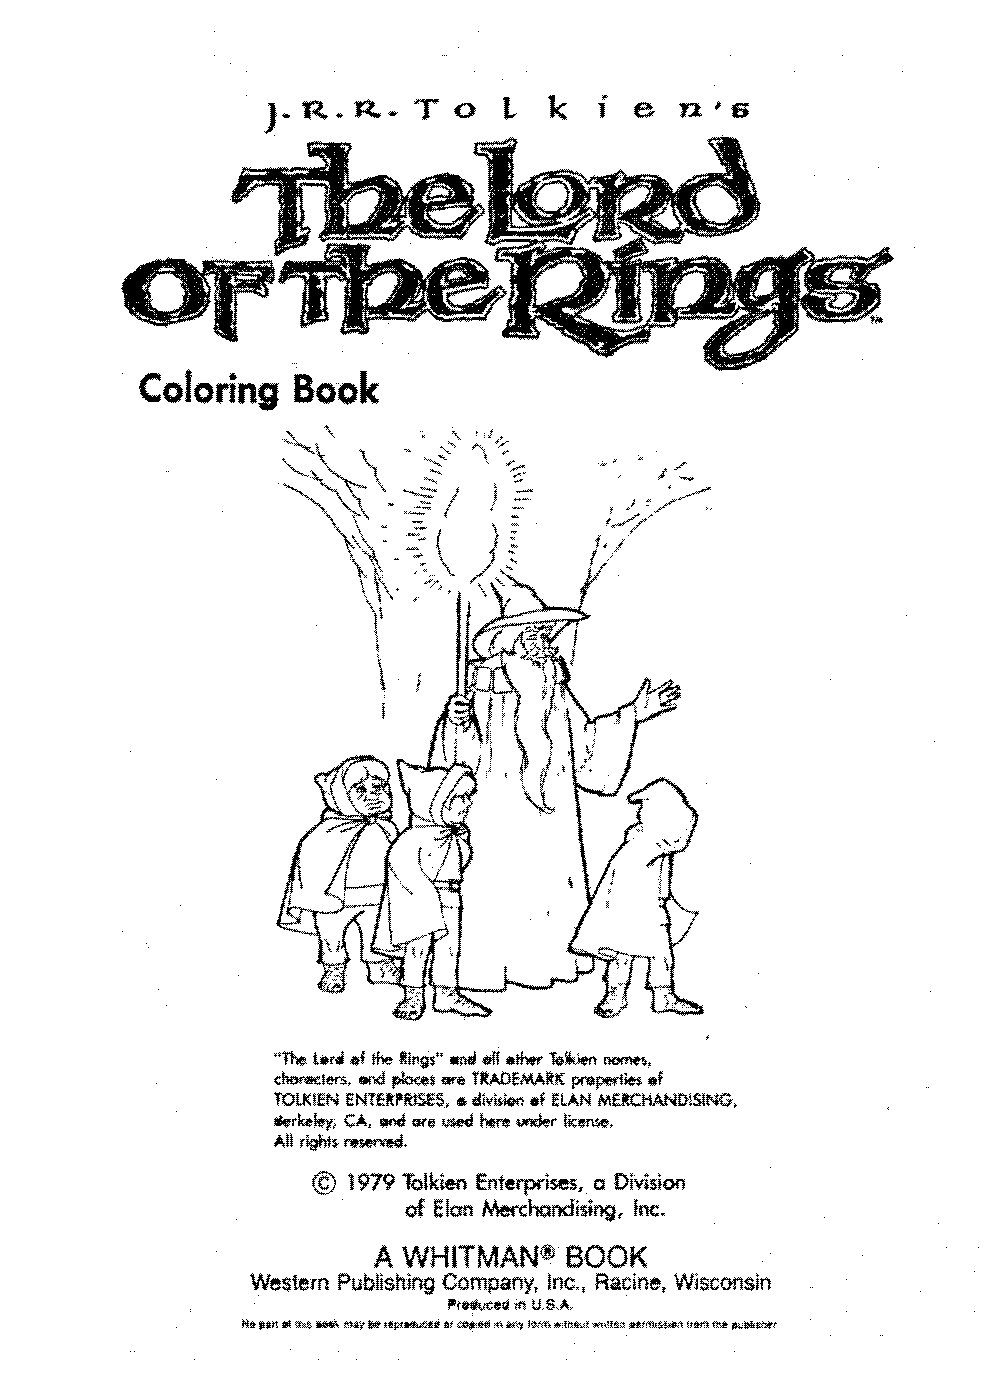 Lord of the rings coloring book pdf digifile